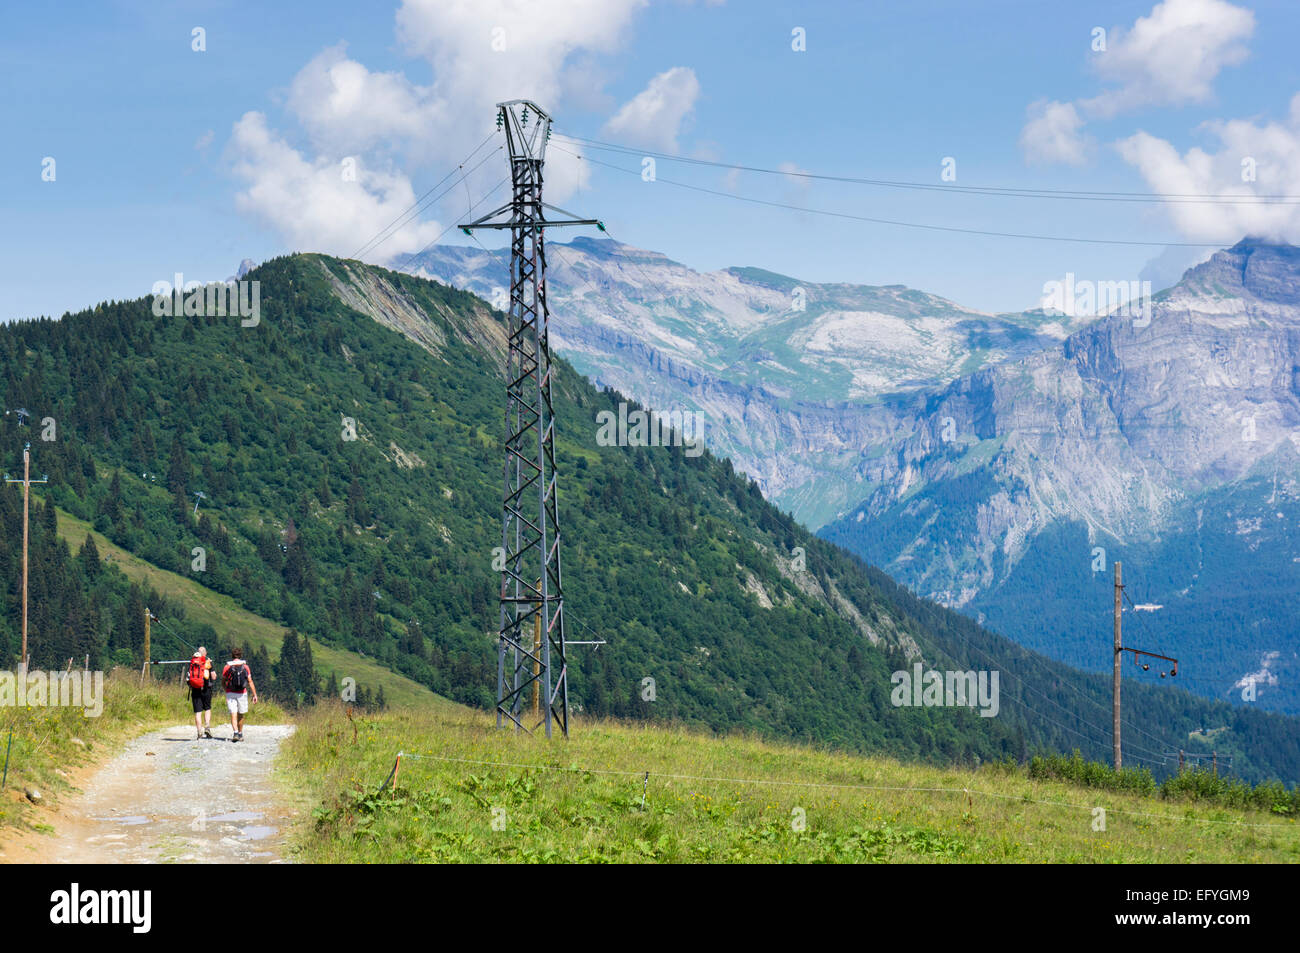 Walkers on path above in French Alps, Europe with high altitude electricity pylon taking power to remote mountain hotels / huts Stock Photo